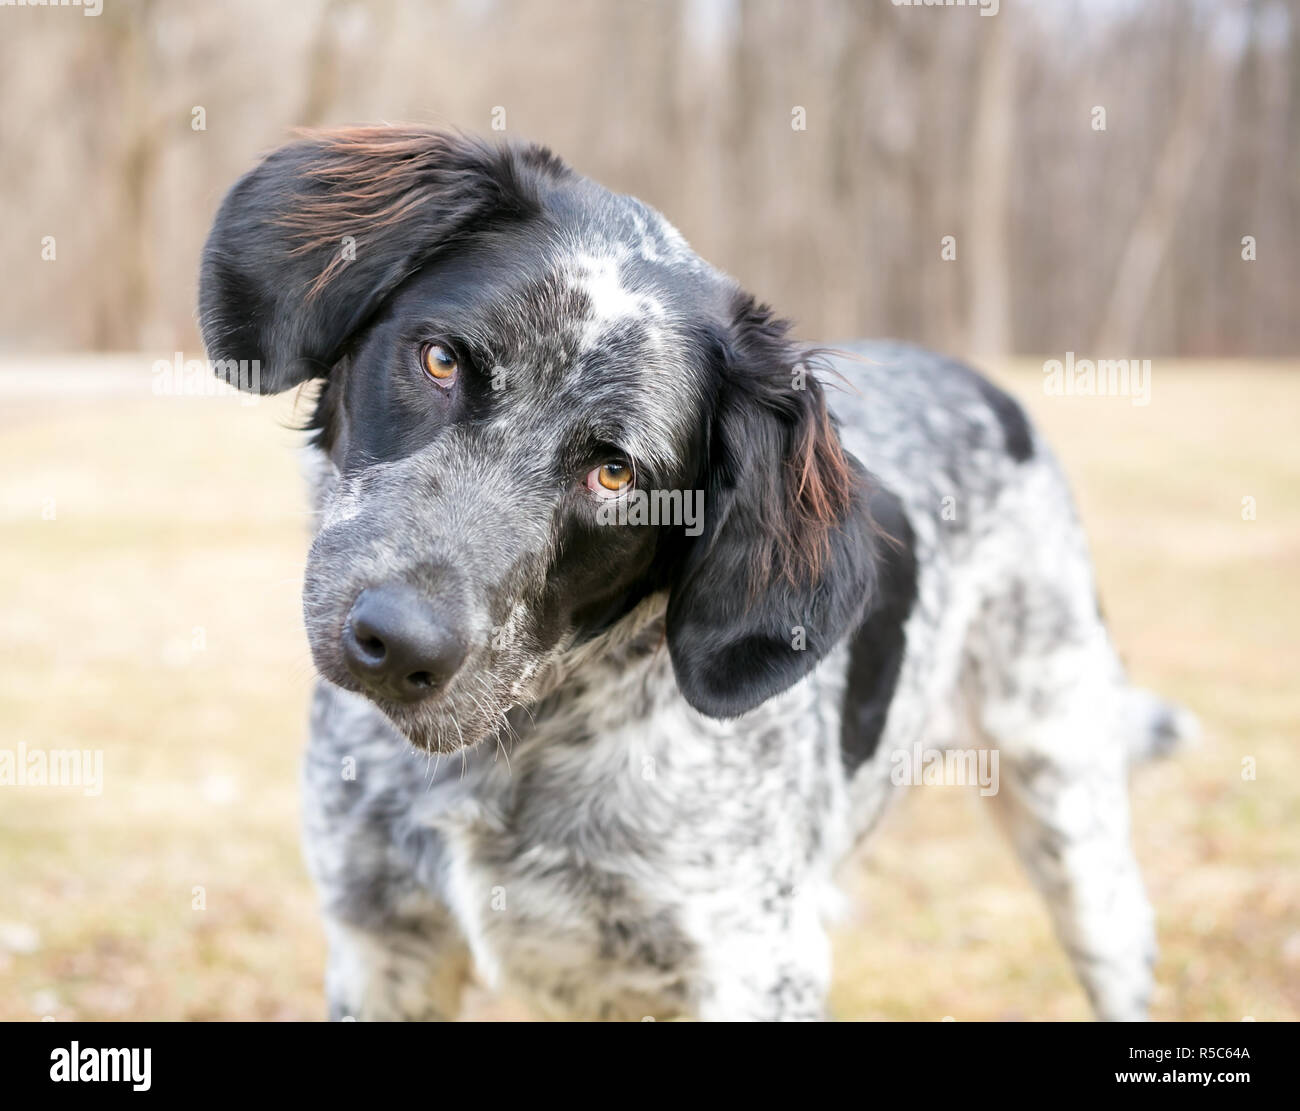 A Spaniel/Pointer mixed breed dog listening with a head tilt Stock Photo